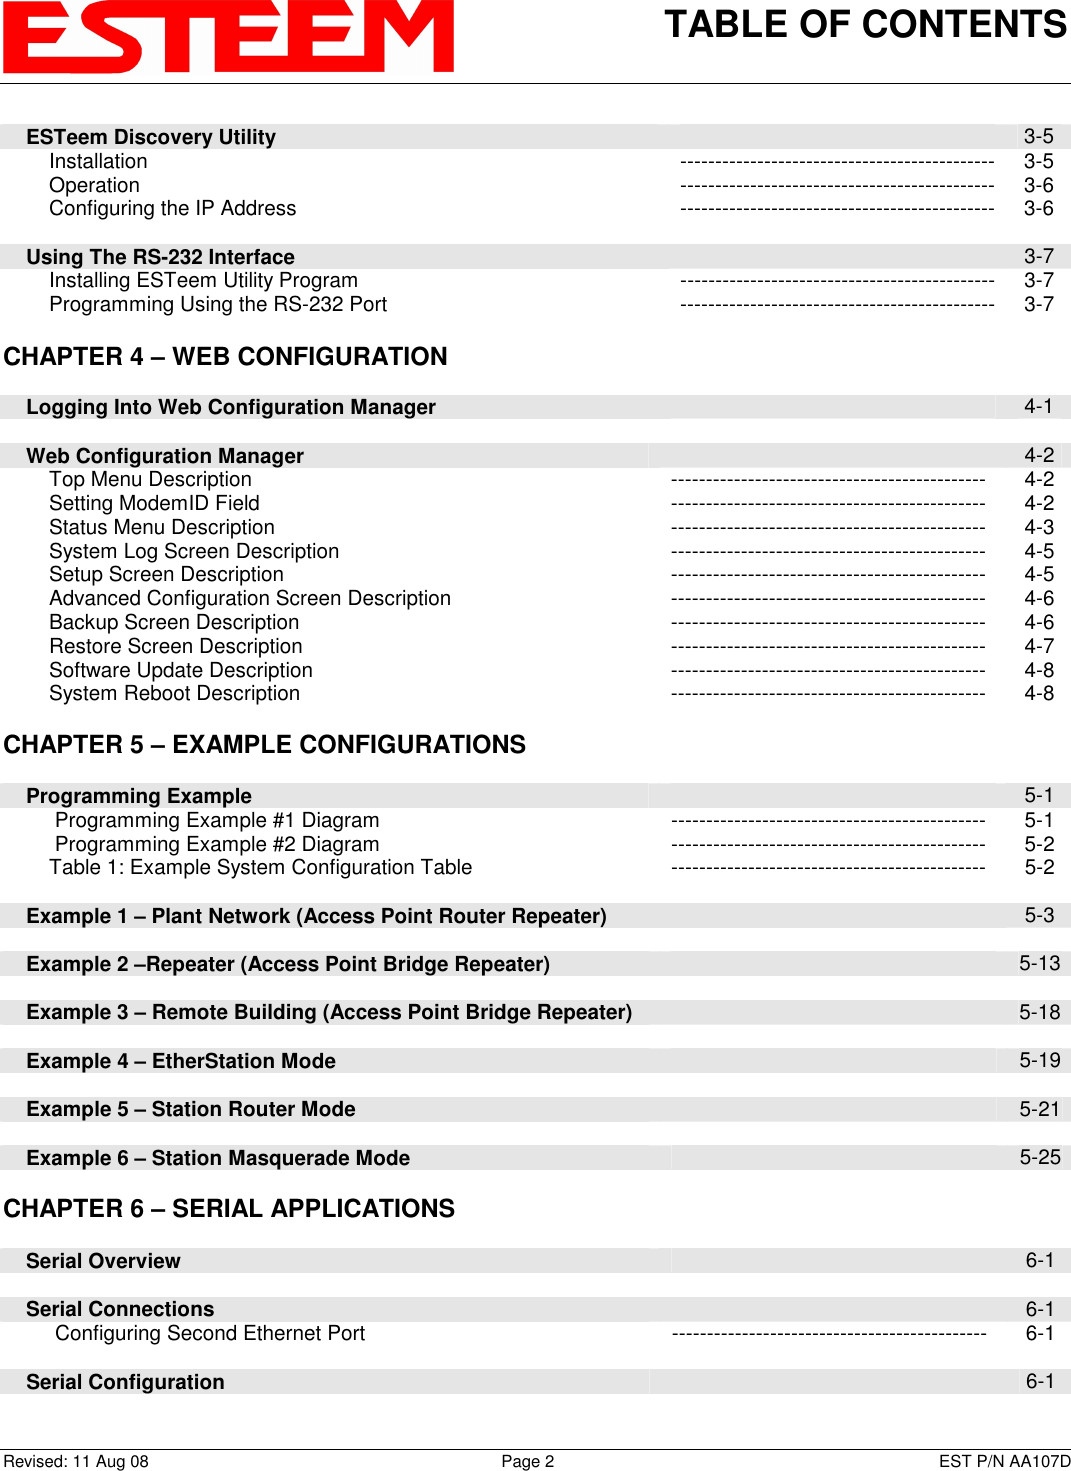 TABLE OF CONTENTS    Revised: 11 Aug 08  Page 2  EST P/N AA107D     ESTeem Discovery Utility   3-5         Installation  --------------------------------------------- 3-5         Operation  --------------------------------------------- 3-6         Configuring the IP Address  --------------------------------------------- 3-6          Using The RS-232 Interface   3-7         Installing ESTeem Utility Program  --------------------------------------------- 3-7         Programming Using the RS-232 Port  --------------------------------------------- 3-7   CHAPTER 4 – WEB CONFIGURATION           Logging Into Web Configuration Manager   4-1          Web Configuration Manager   4-2         Top Menu Description  ---------------------------------------------  4-2         Setting ModemID Field  ---------------------------------------------  4-2         Status Menu Description  ---------------------------------------------  4-3         System Log Screen Description  ---------------------------------------------  4-5         Setup Screen Description  ---------------------------------------------  4-5         Advanced Configuration Screen Description  ---------------------------------------------  4-6         Backup Screen Description  ---------------------------------------------  4-6         Restore Screen Description  ---------------------------------------------  4-7         Software Update Description  ---------------------------------------------  4-8         System Reboot Description  ---------------------------------------------  4-8      CHAPTER 5 – EXAMPLE CONFIGURATIONS           Programming Example   5-1          Programming Example #1 Diagram  ---------------------------------------------  5-1          Programming Example #2 Diagram  ---------------------------------------------  5-2         Table 1: Example System Configuration Table  ---------------------------------------------  5-2          Example 1 – Plant Network (Access Point Router Repeater)   5-3          Example 2 –Repeater (Access Point Bridge Repeater)   5-13          Example 3 – Remote Building (Access Point Bridge Repeater)   5-18          Example 4 – EtherStation Mode   5-19          Example 5 – Station Router Mode   5-21          Example 6 – Station Masquerade Mode   5-25      CHAPTER 6 – SERIAL APPLICATIONS           Serial Overview   6-1          Serial Connections   6-1          Configuring Second Ethernet Port  ---------------------------------------------  6-1          Serial Configuration   6-1      